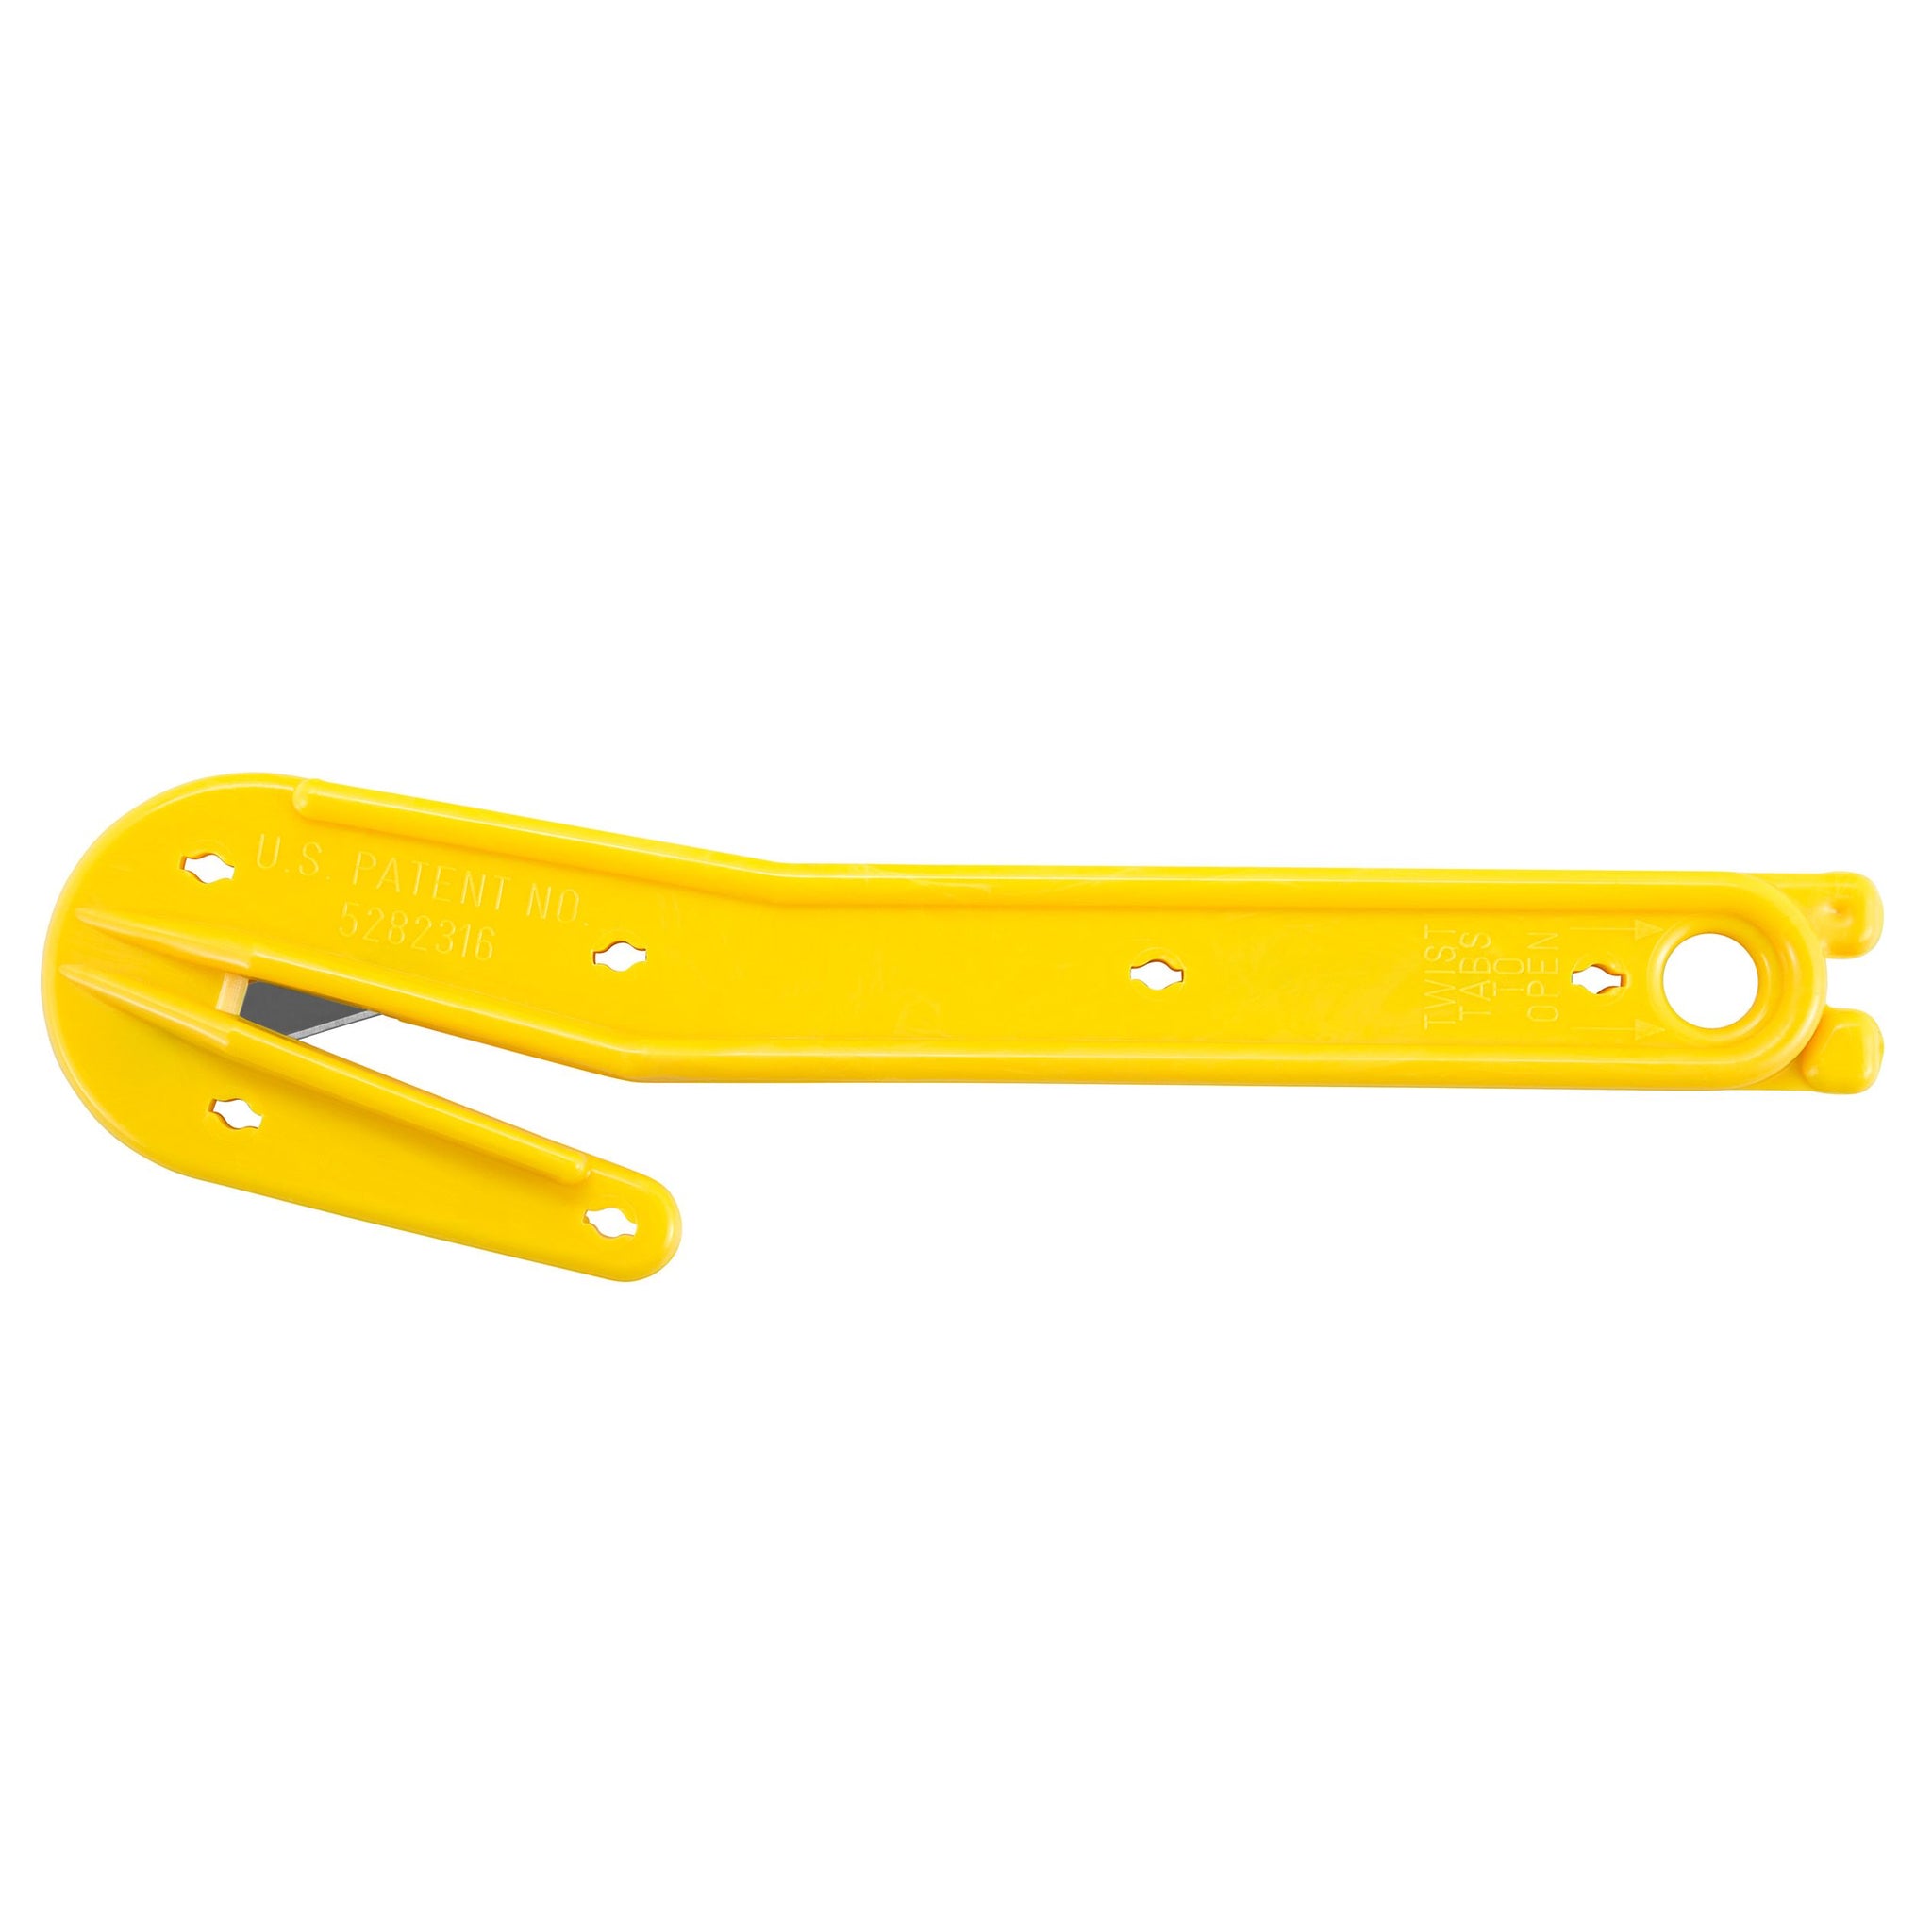 Pacific Handy Cutter DFC364NSFY Disposable Film Cutter - Yellow